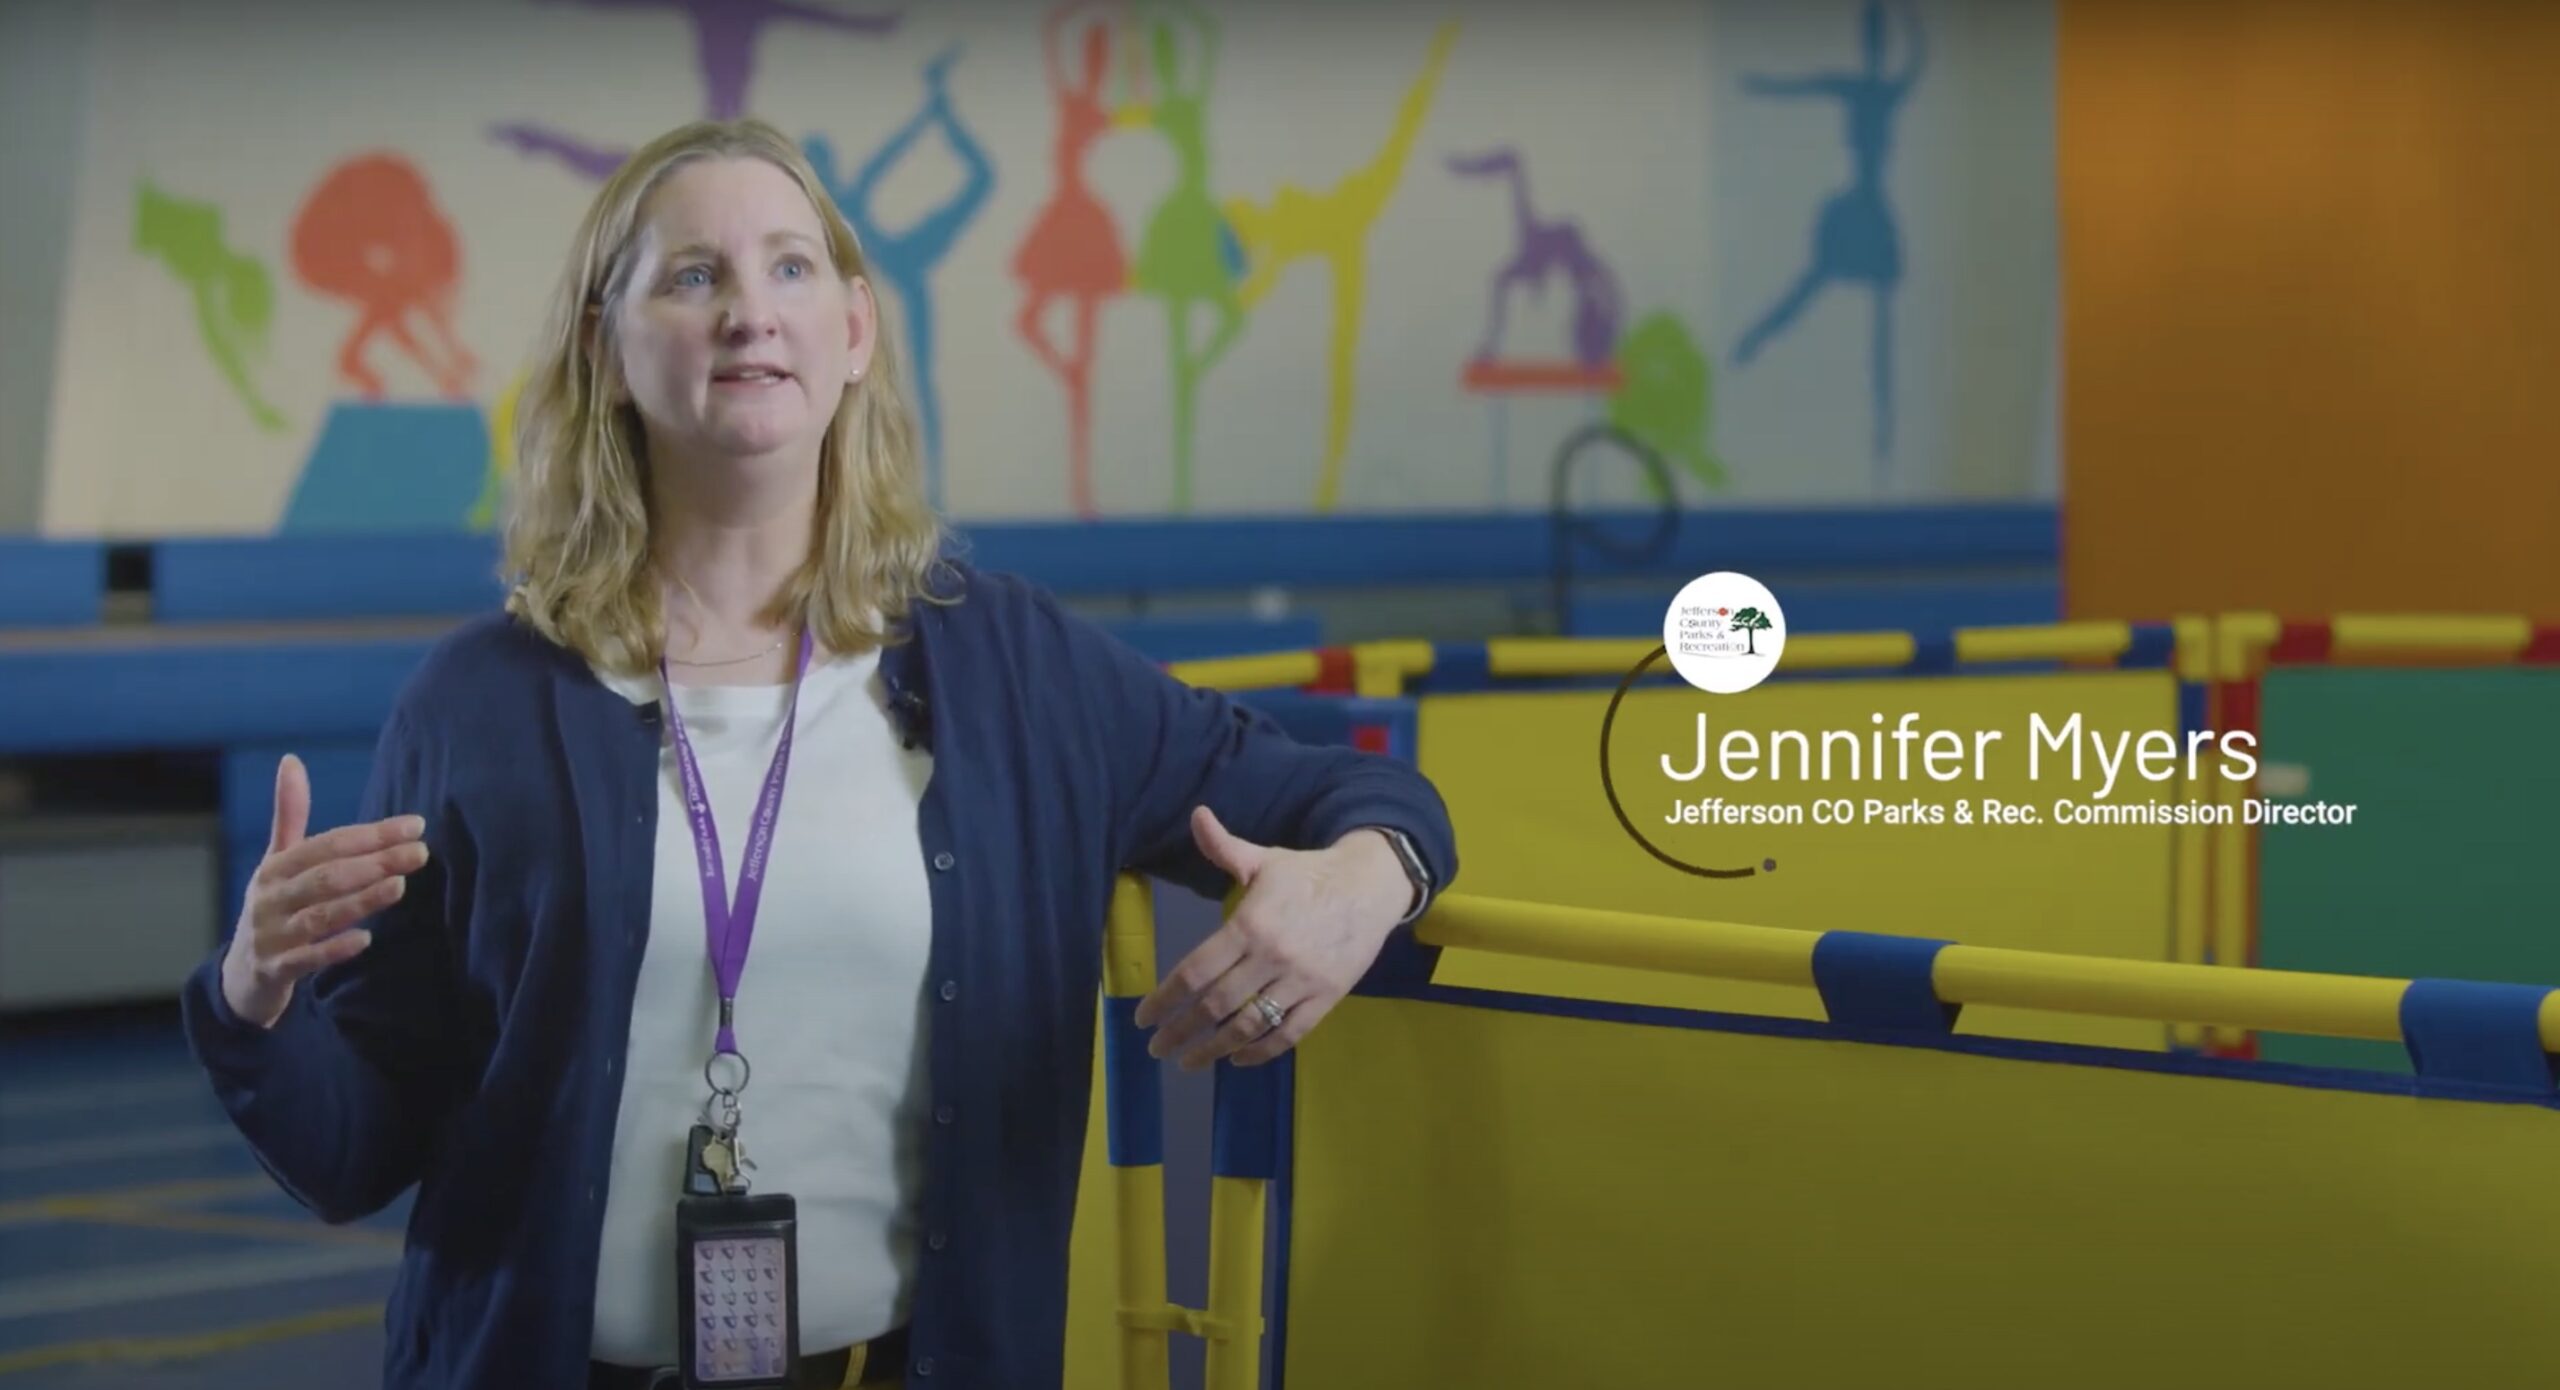 Jennifer Myers talks about working with WVcorp